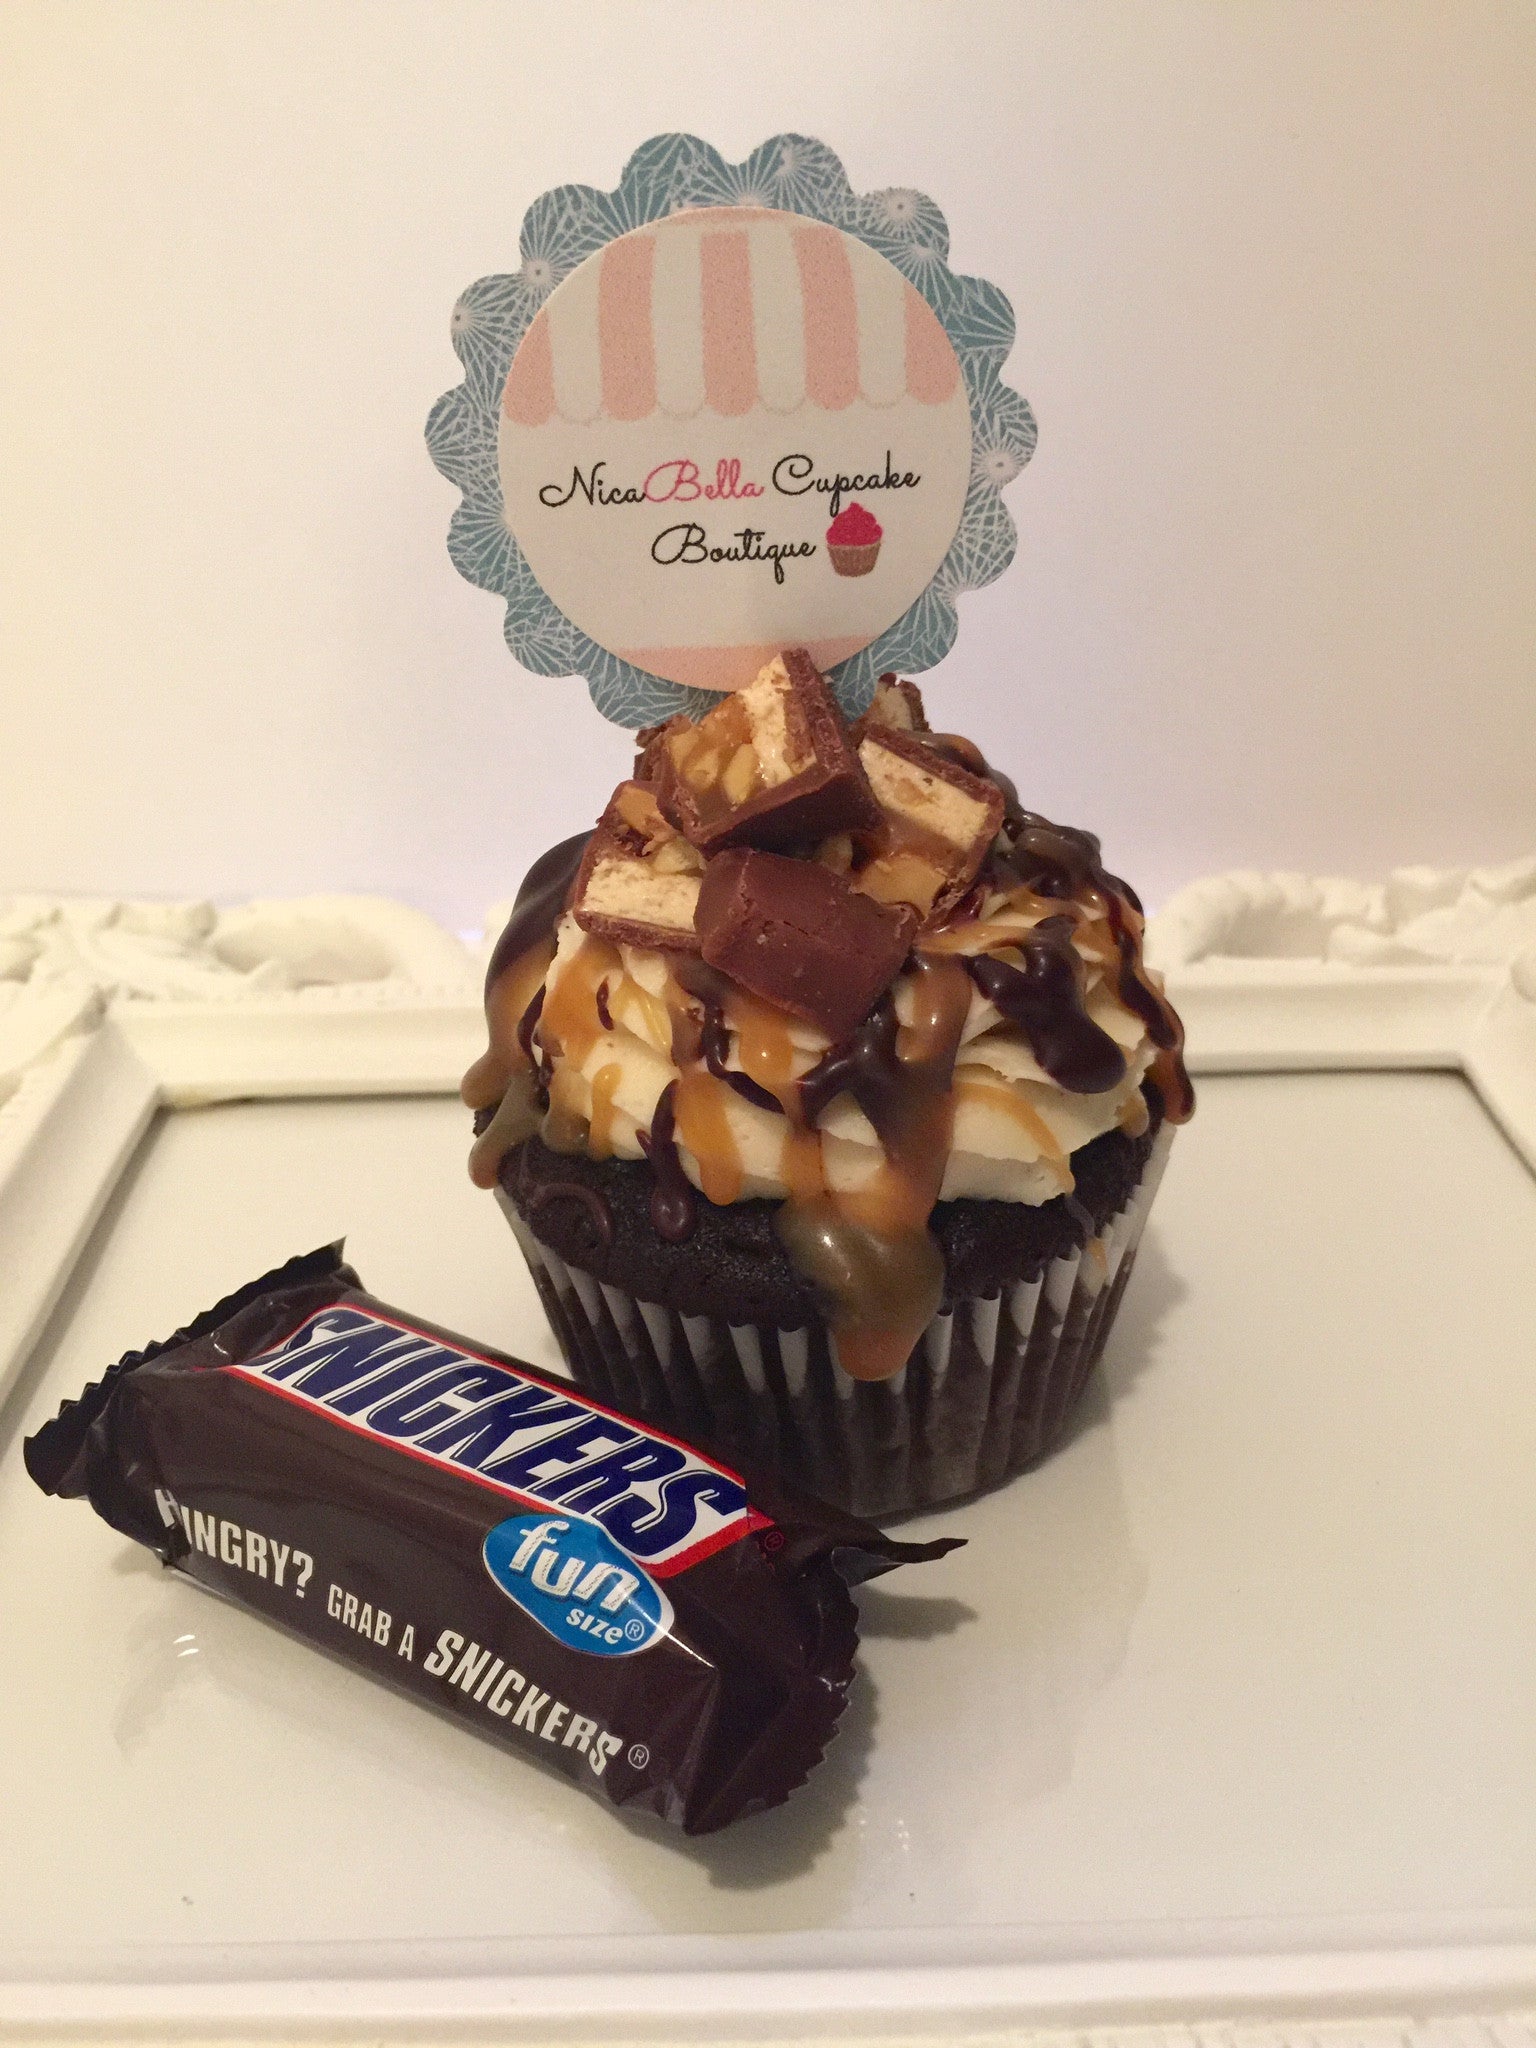 Snickers Inspired Cupcake - NicaBella Cupcake Boutique